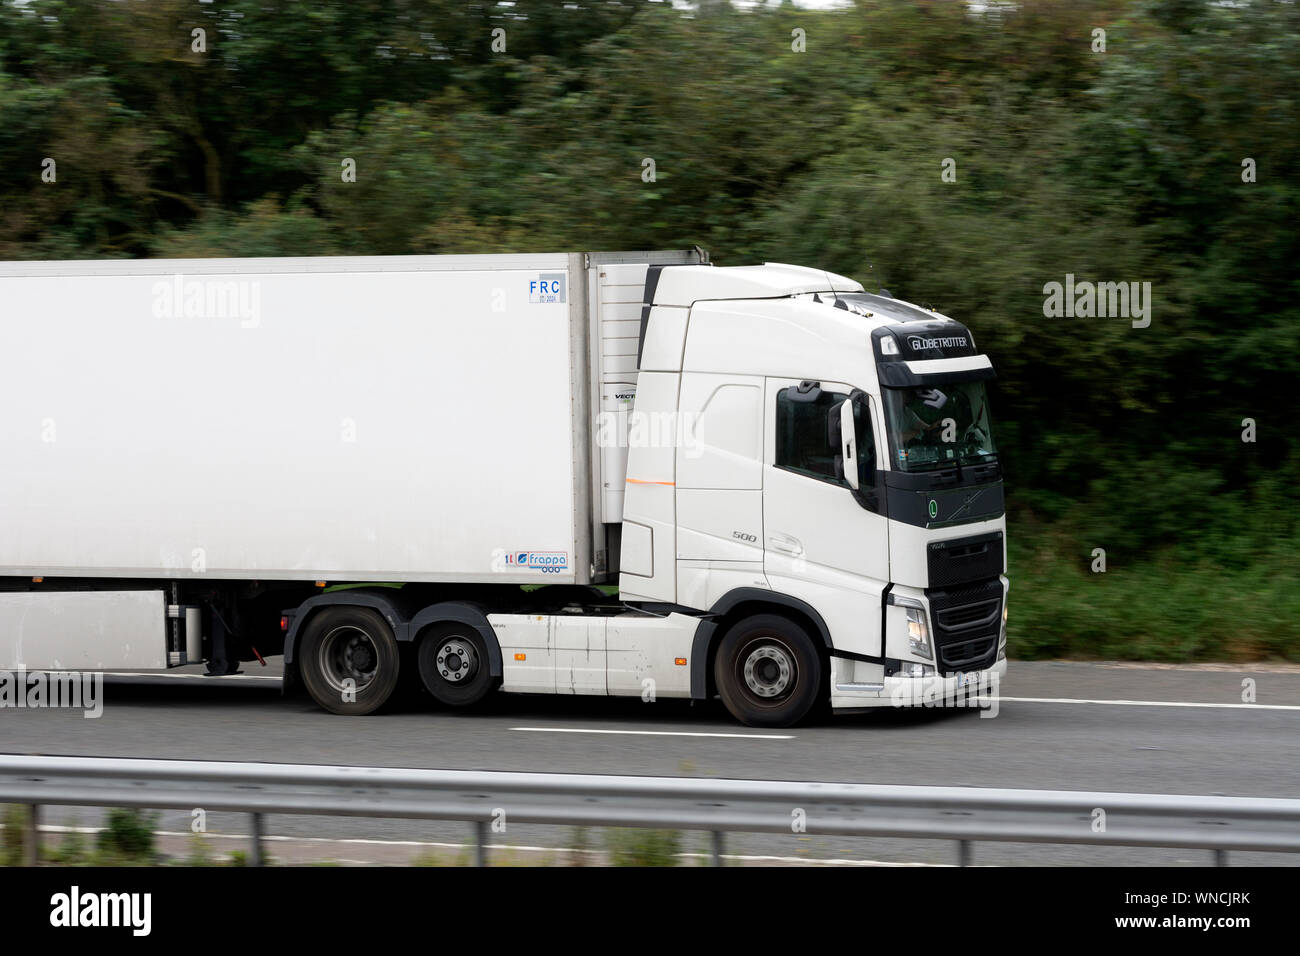 A Volvo articulated lorry on the M40 motorway, Warwickshire, England, UK Stock Photo